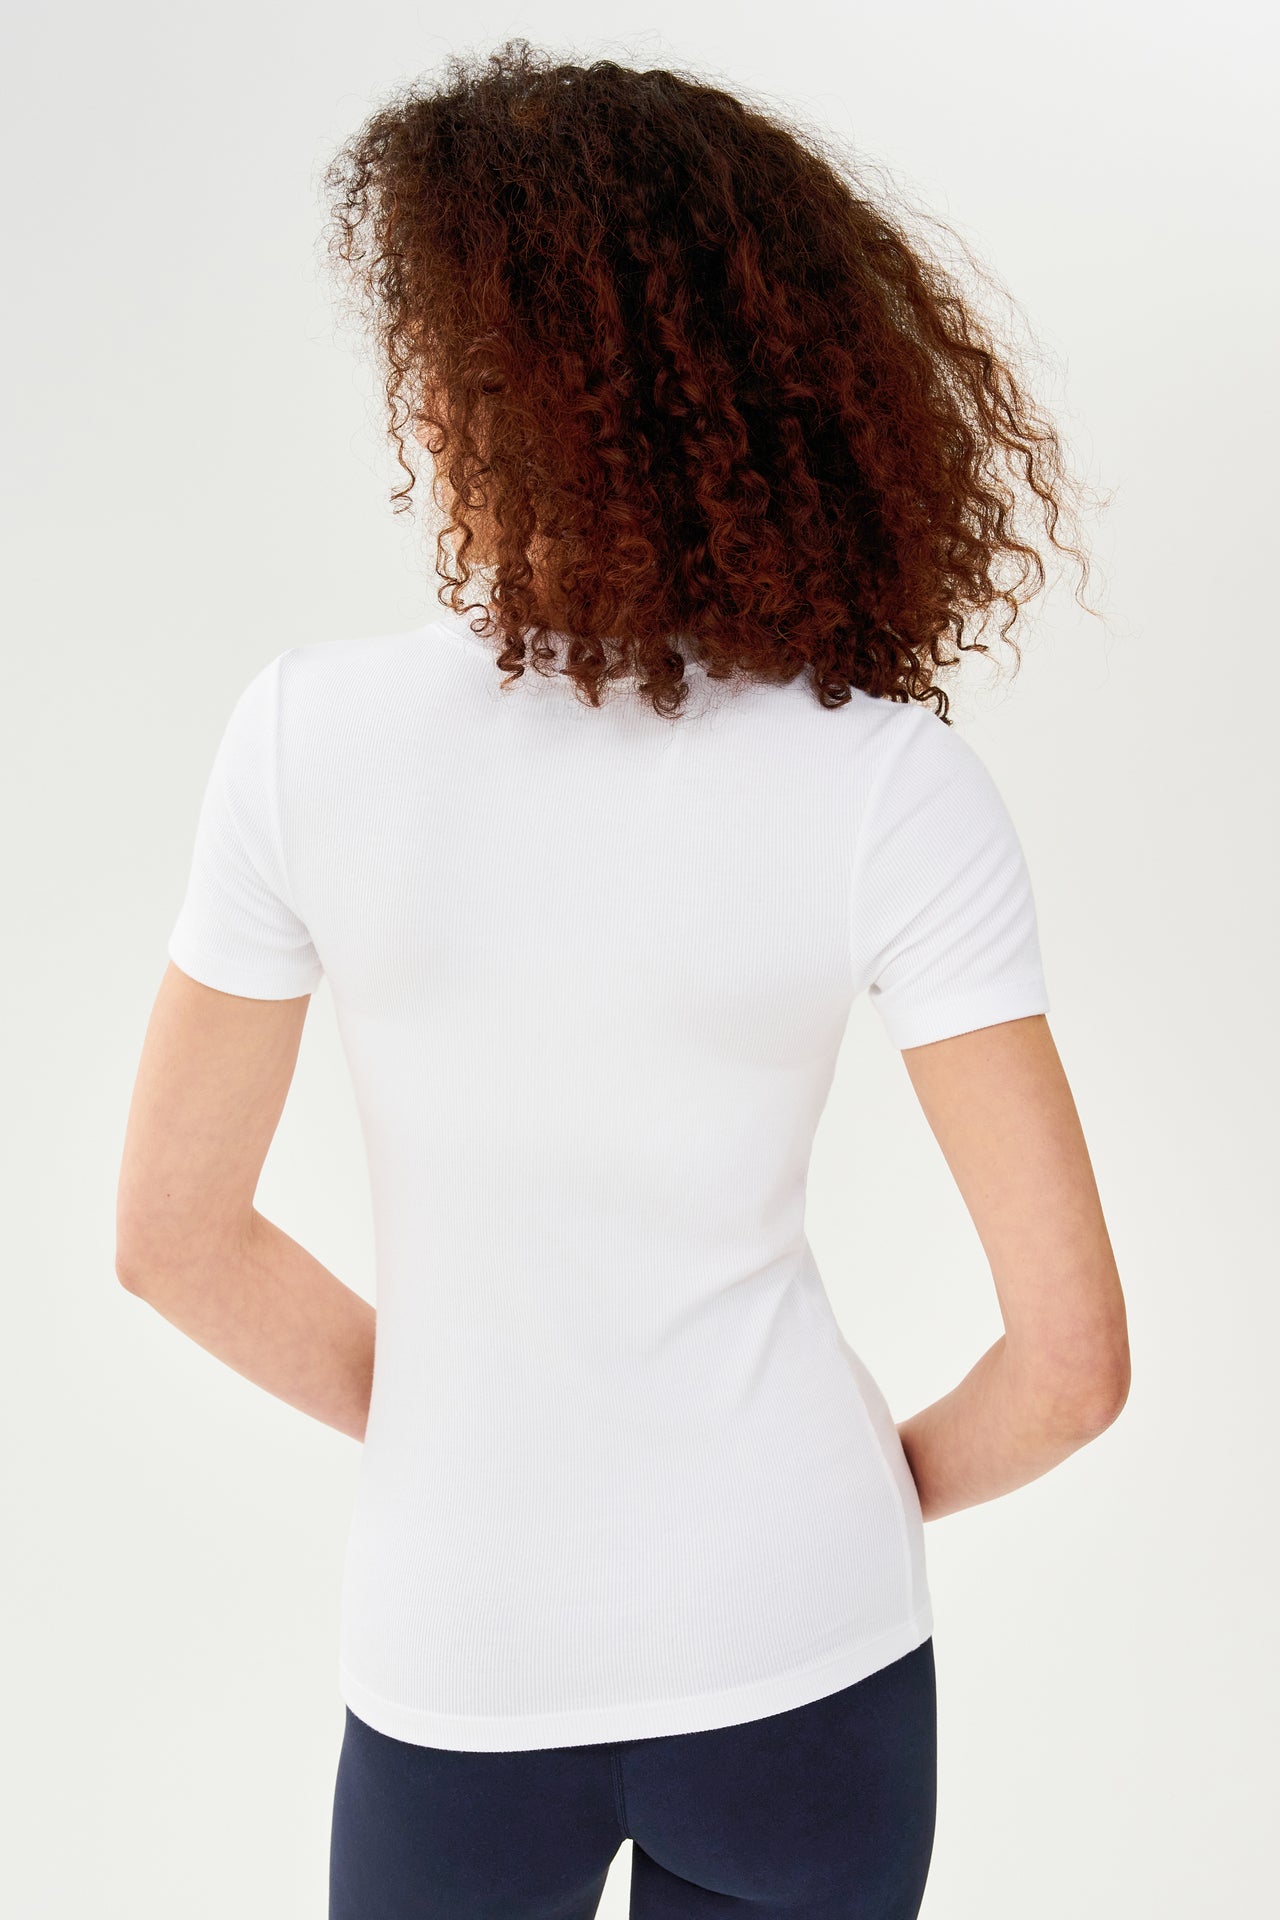 The back view of a woman wearing a SPLITS59 Louise Rib Short Sleeve - White t-shirt and leggings, ready for her yoga session.